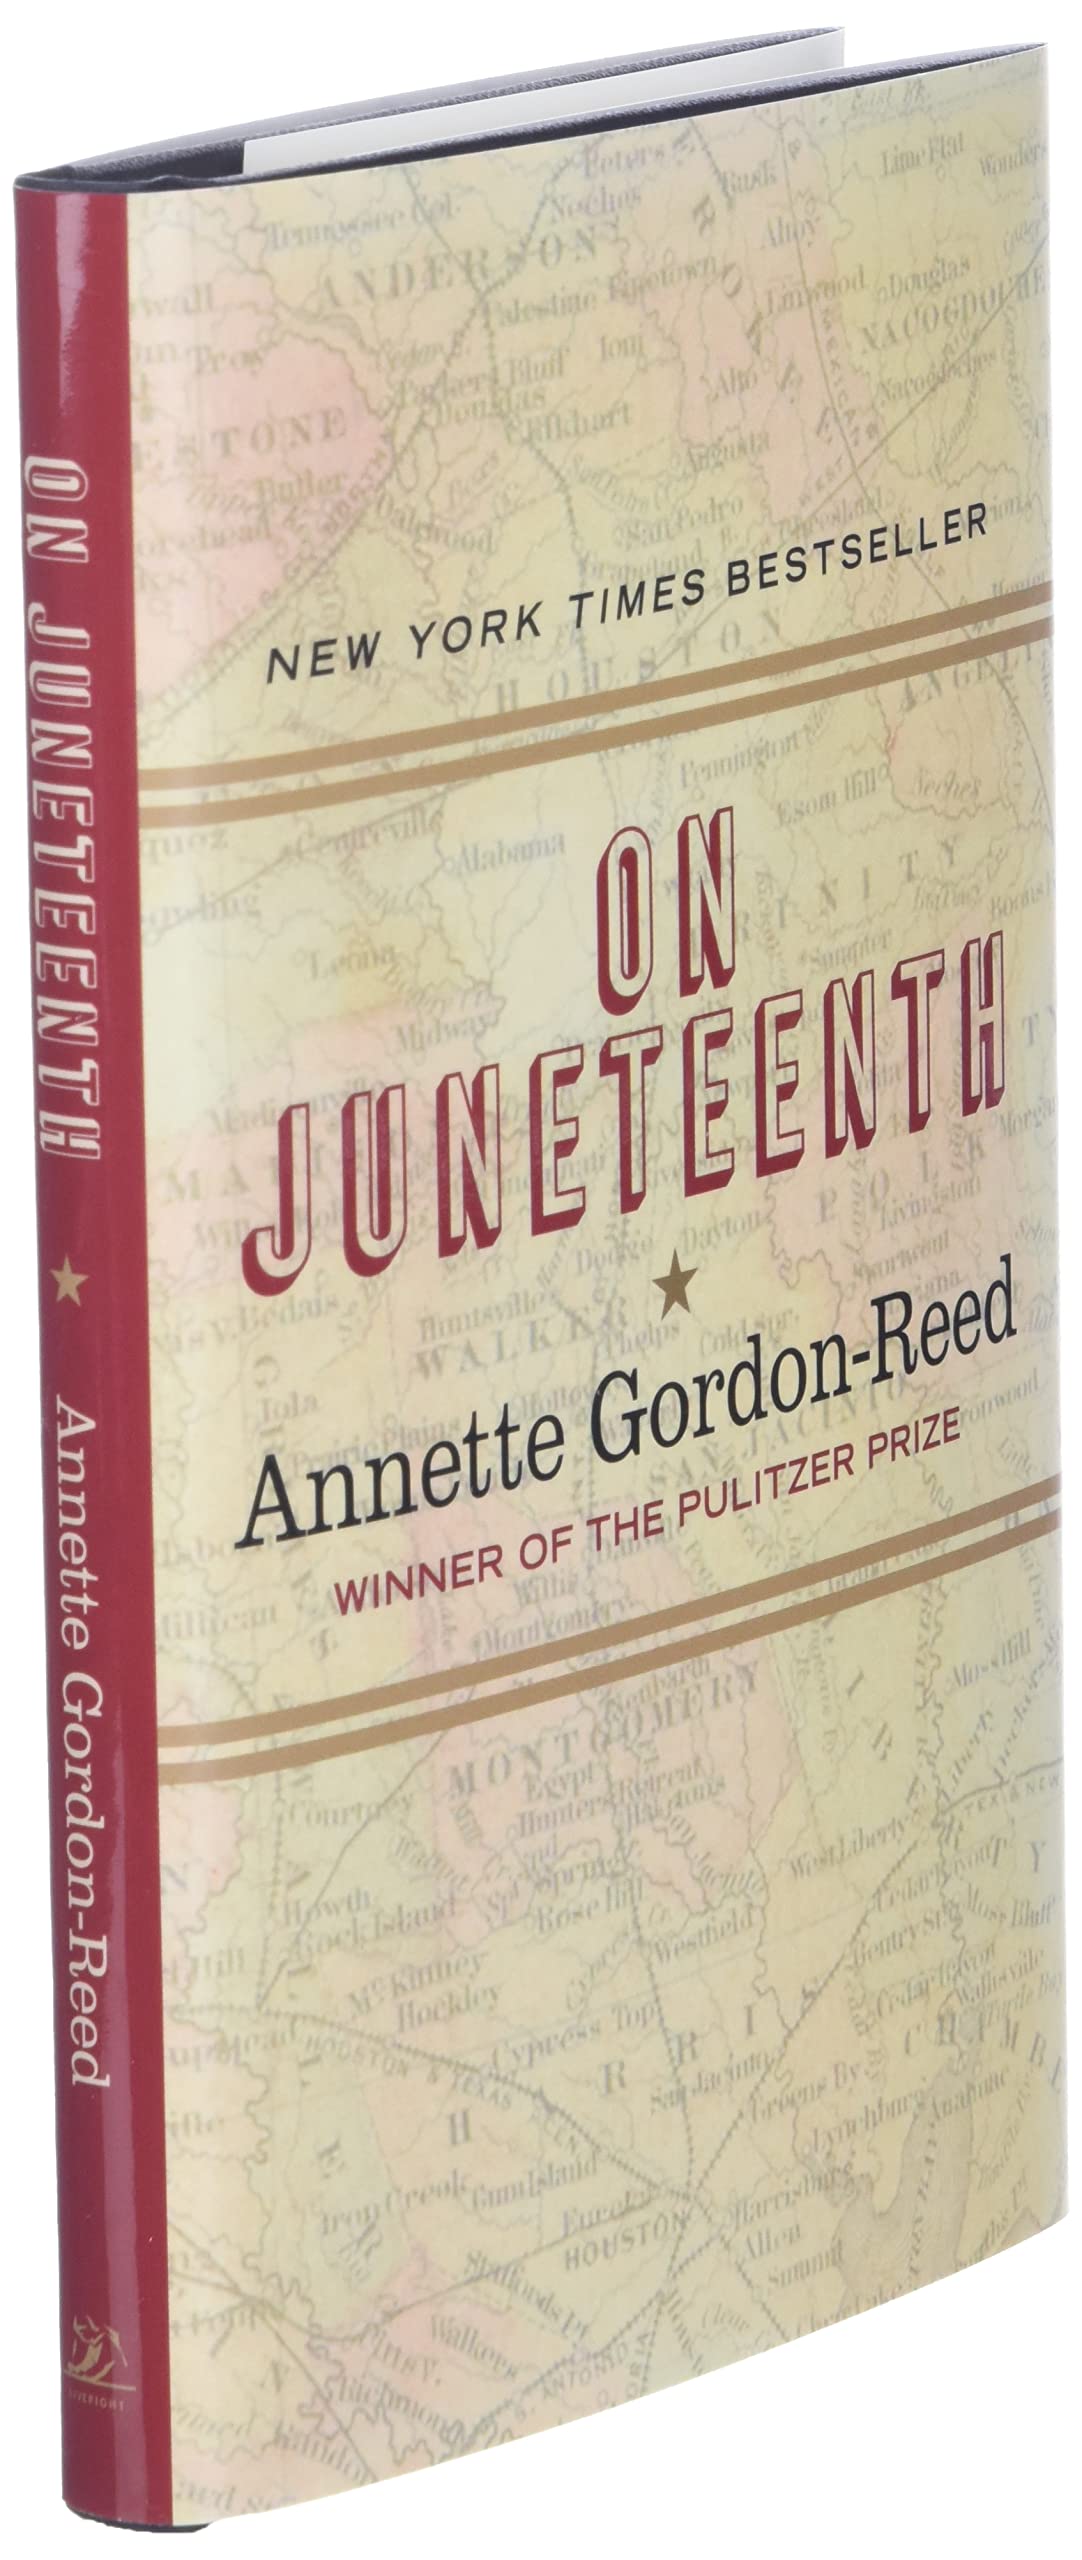 On Juneteenth (Hardcover)